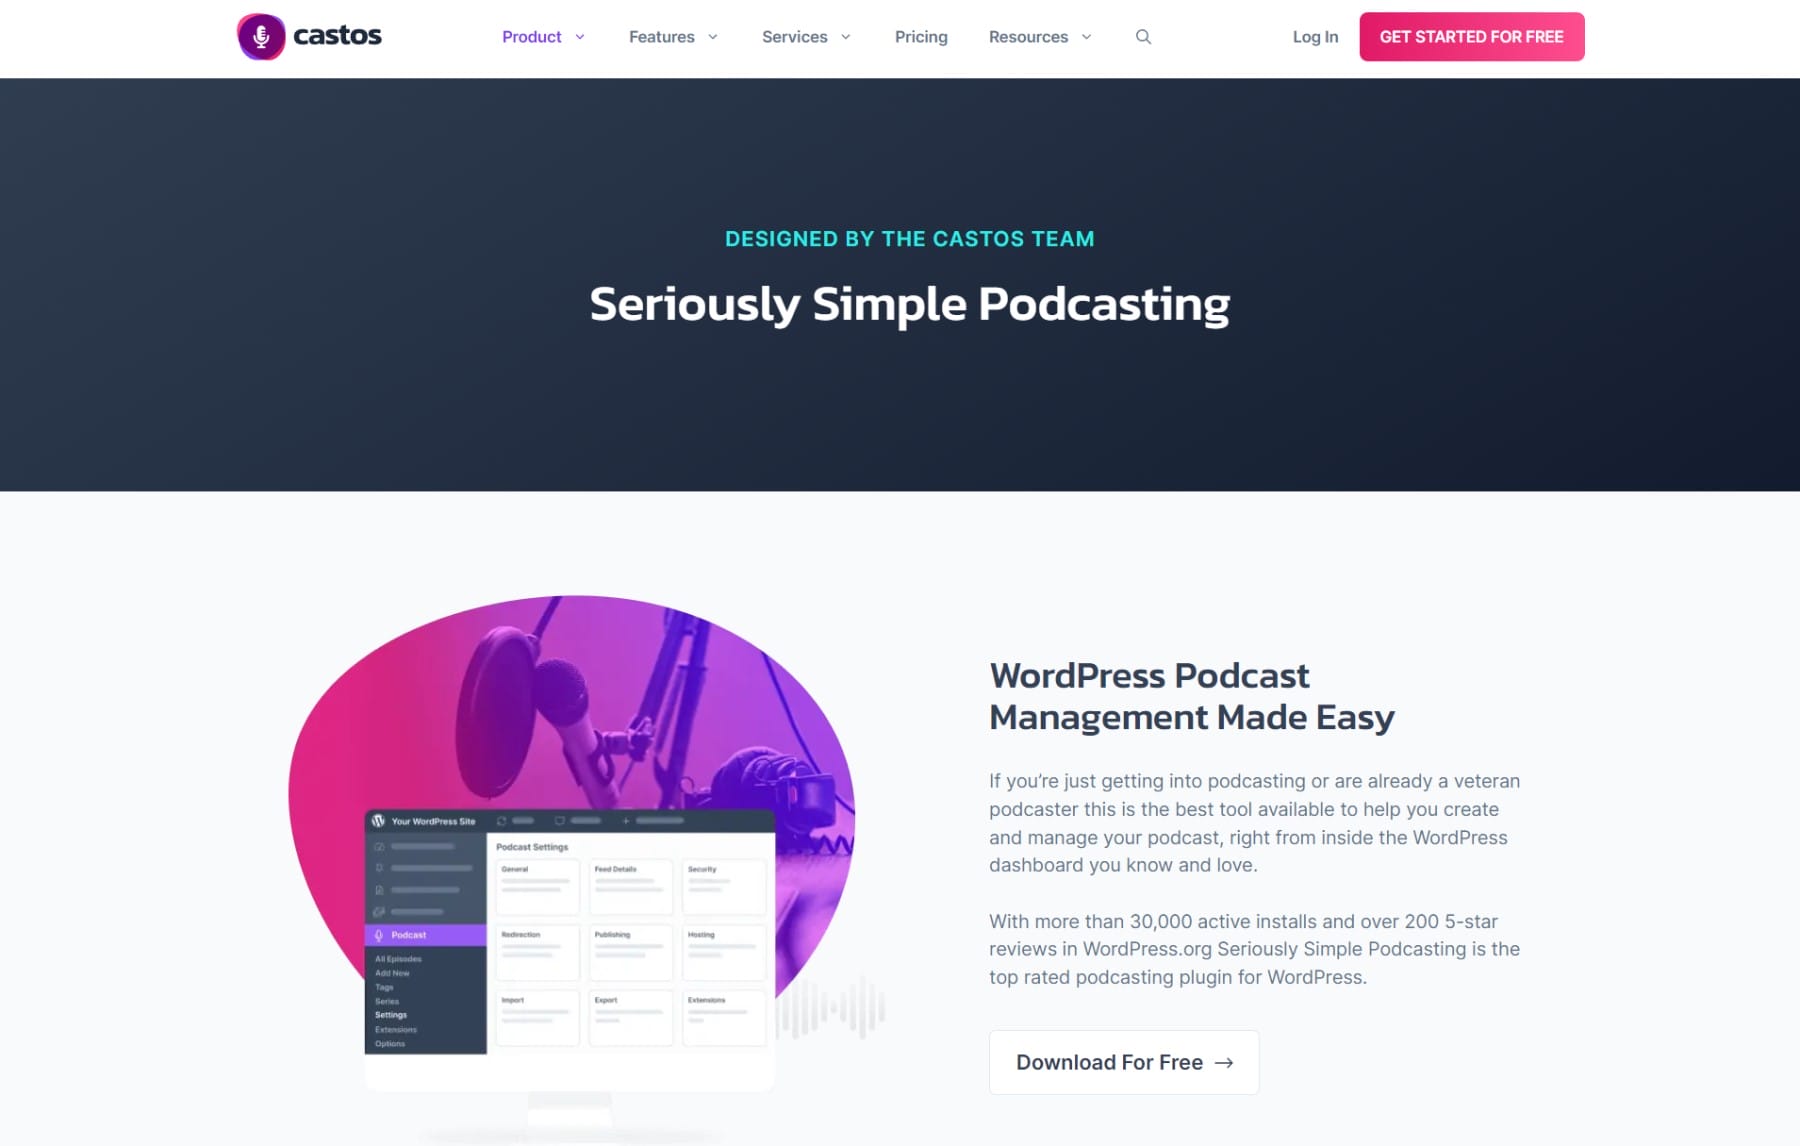 Seriously Simple Podcasting by Castos